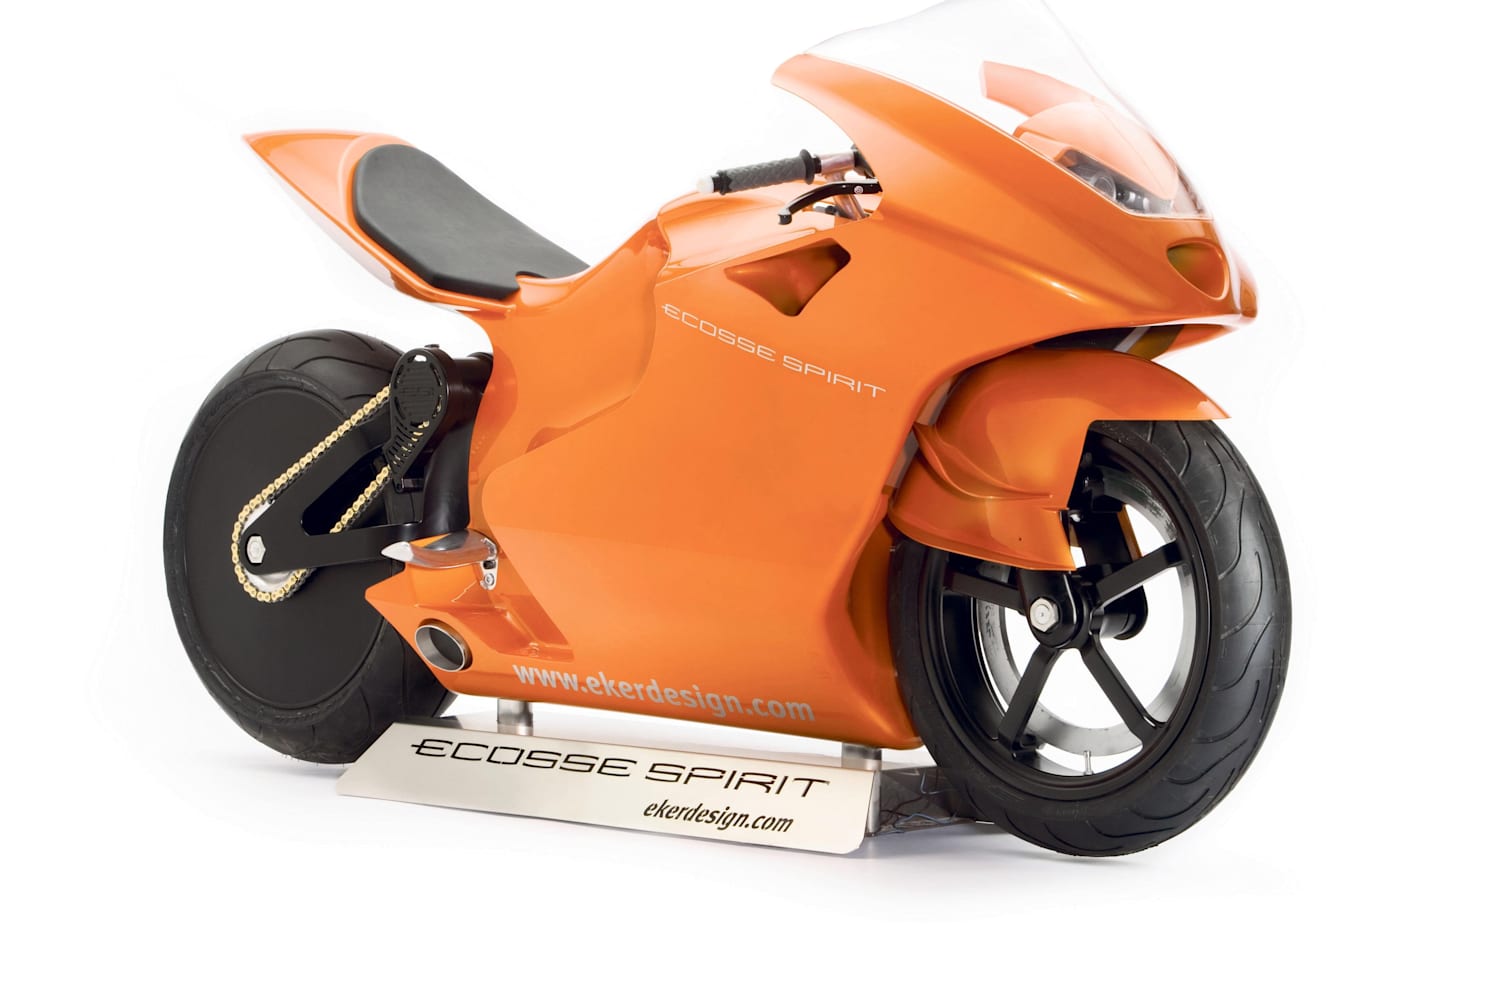 world most expensive bike price in indian rupees